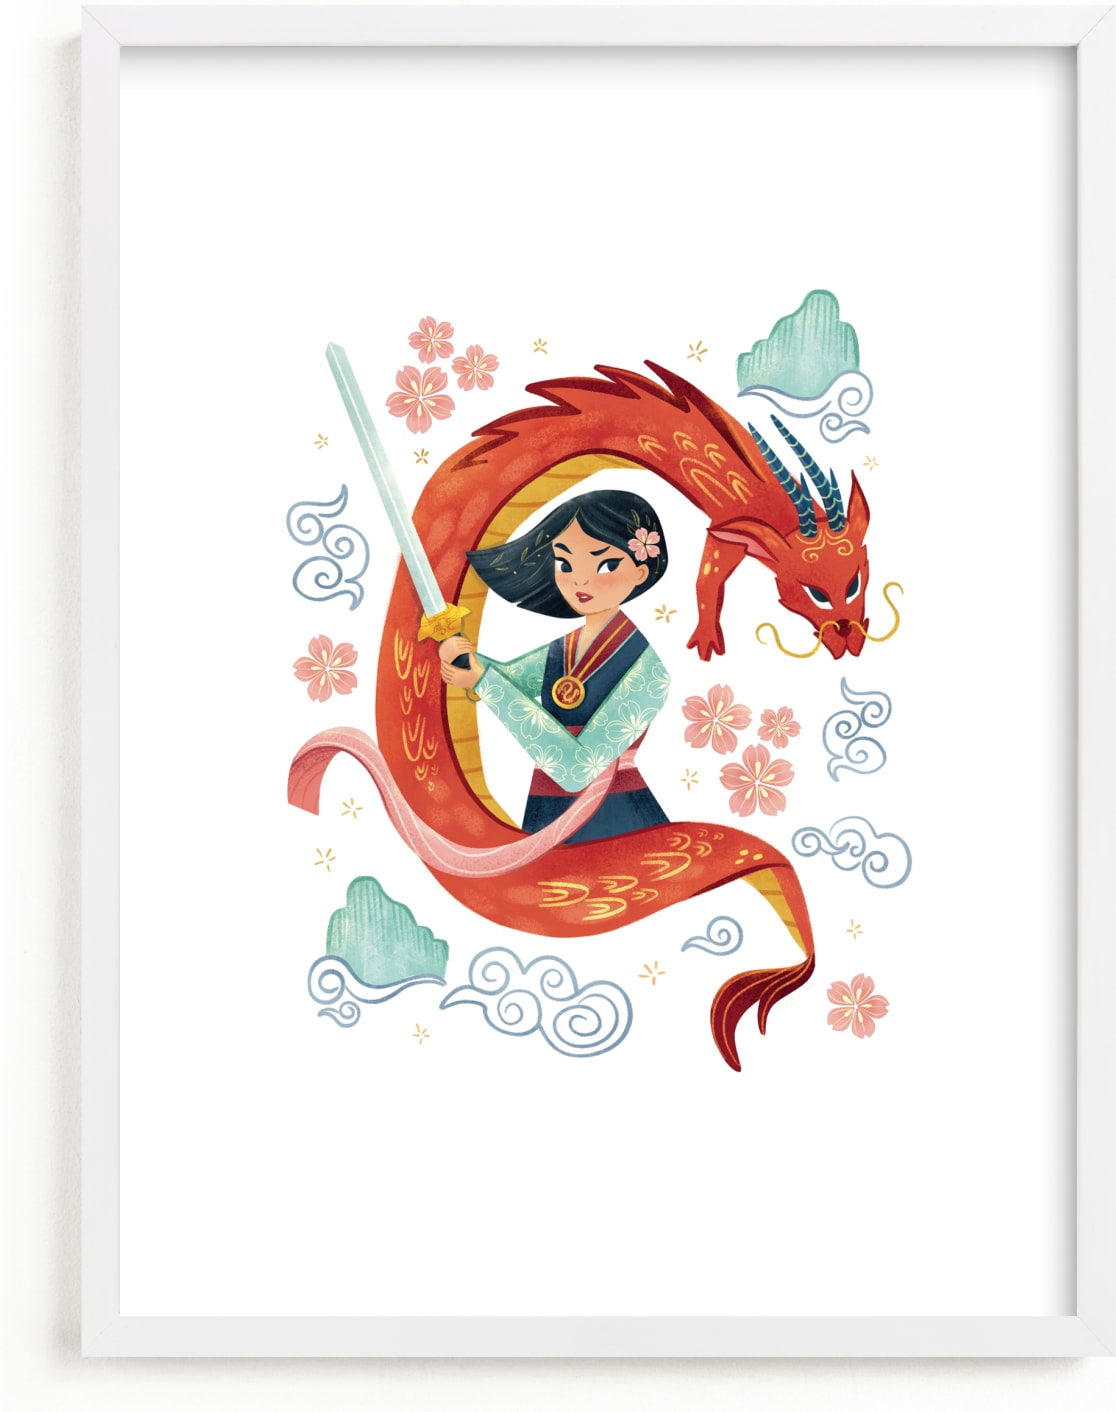 This is a colorful disney art by curiouszhi called Disney's Warrior Princess Mulan.